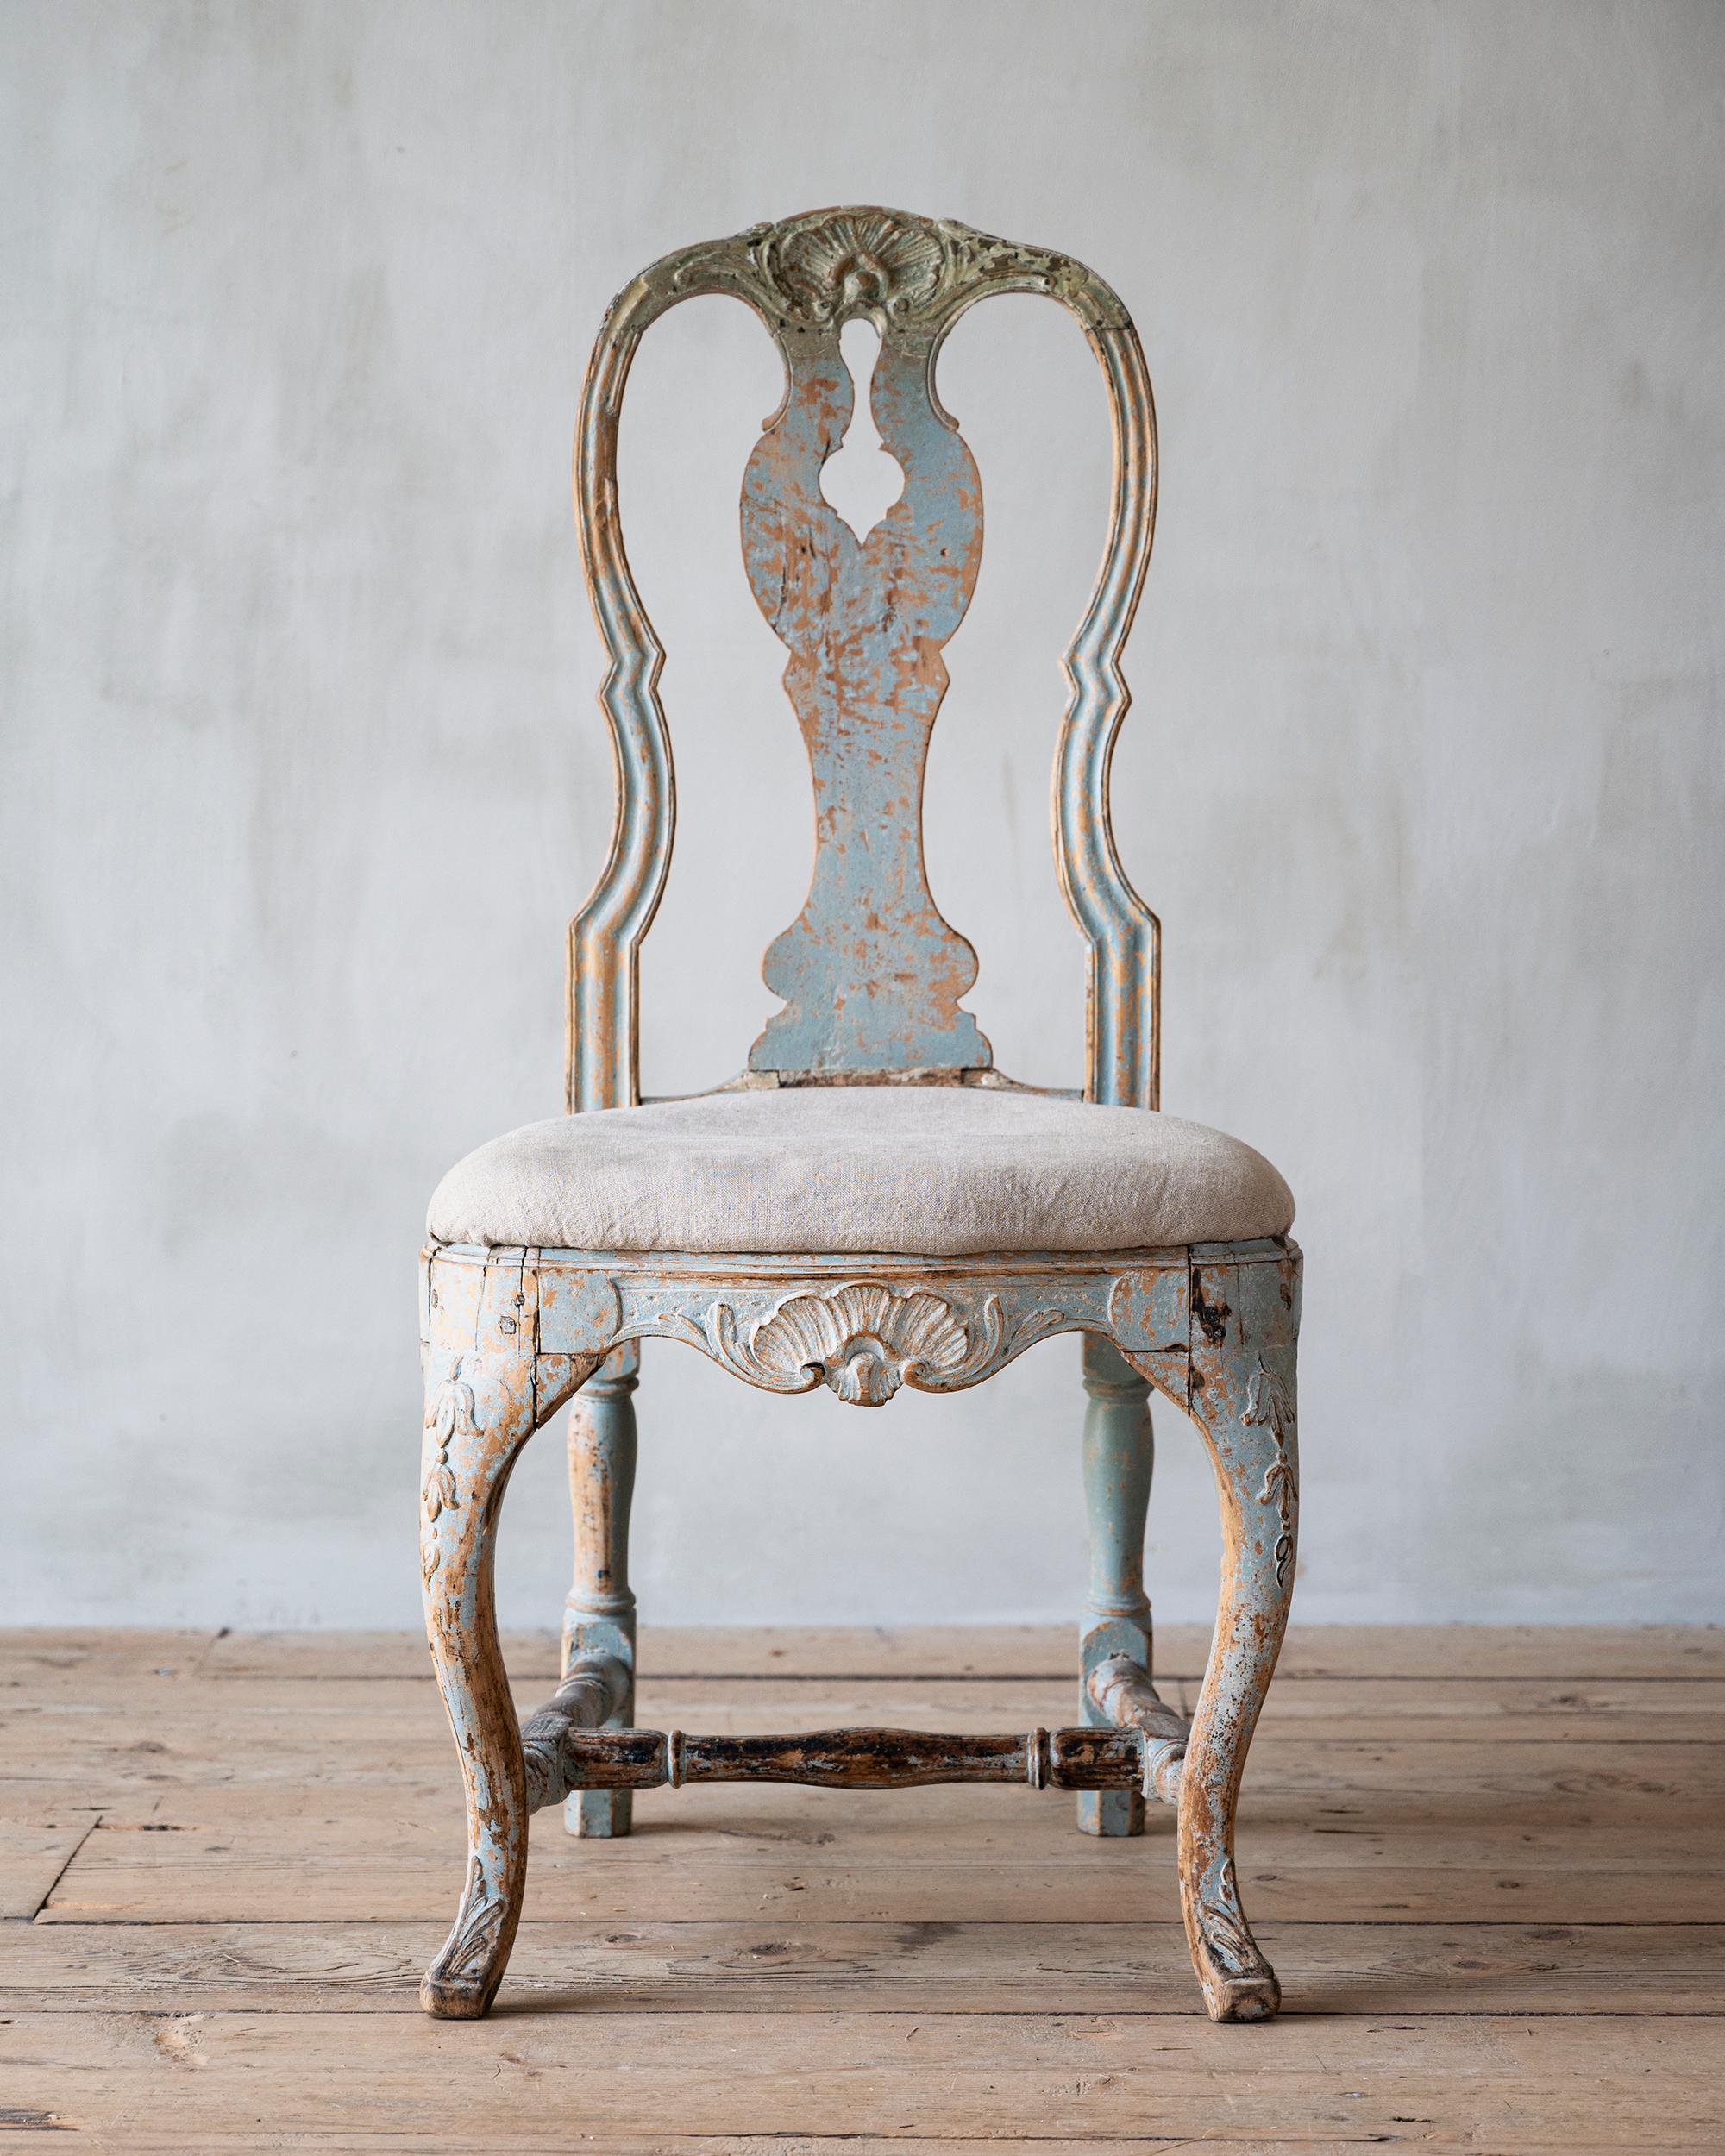 Exceptional 18th century Swedish Rococo chair with embossed carvings, original surface and great shape. ca 1770 Sweden. 